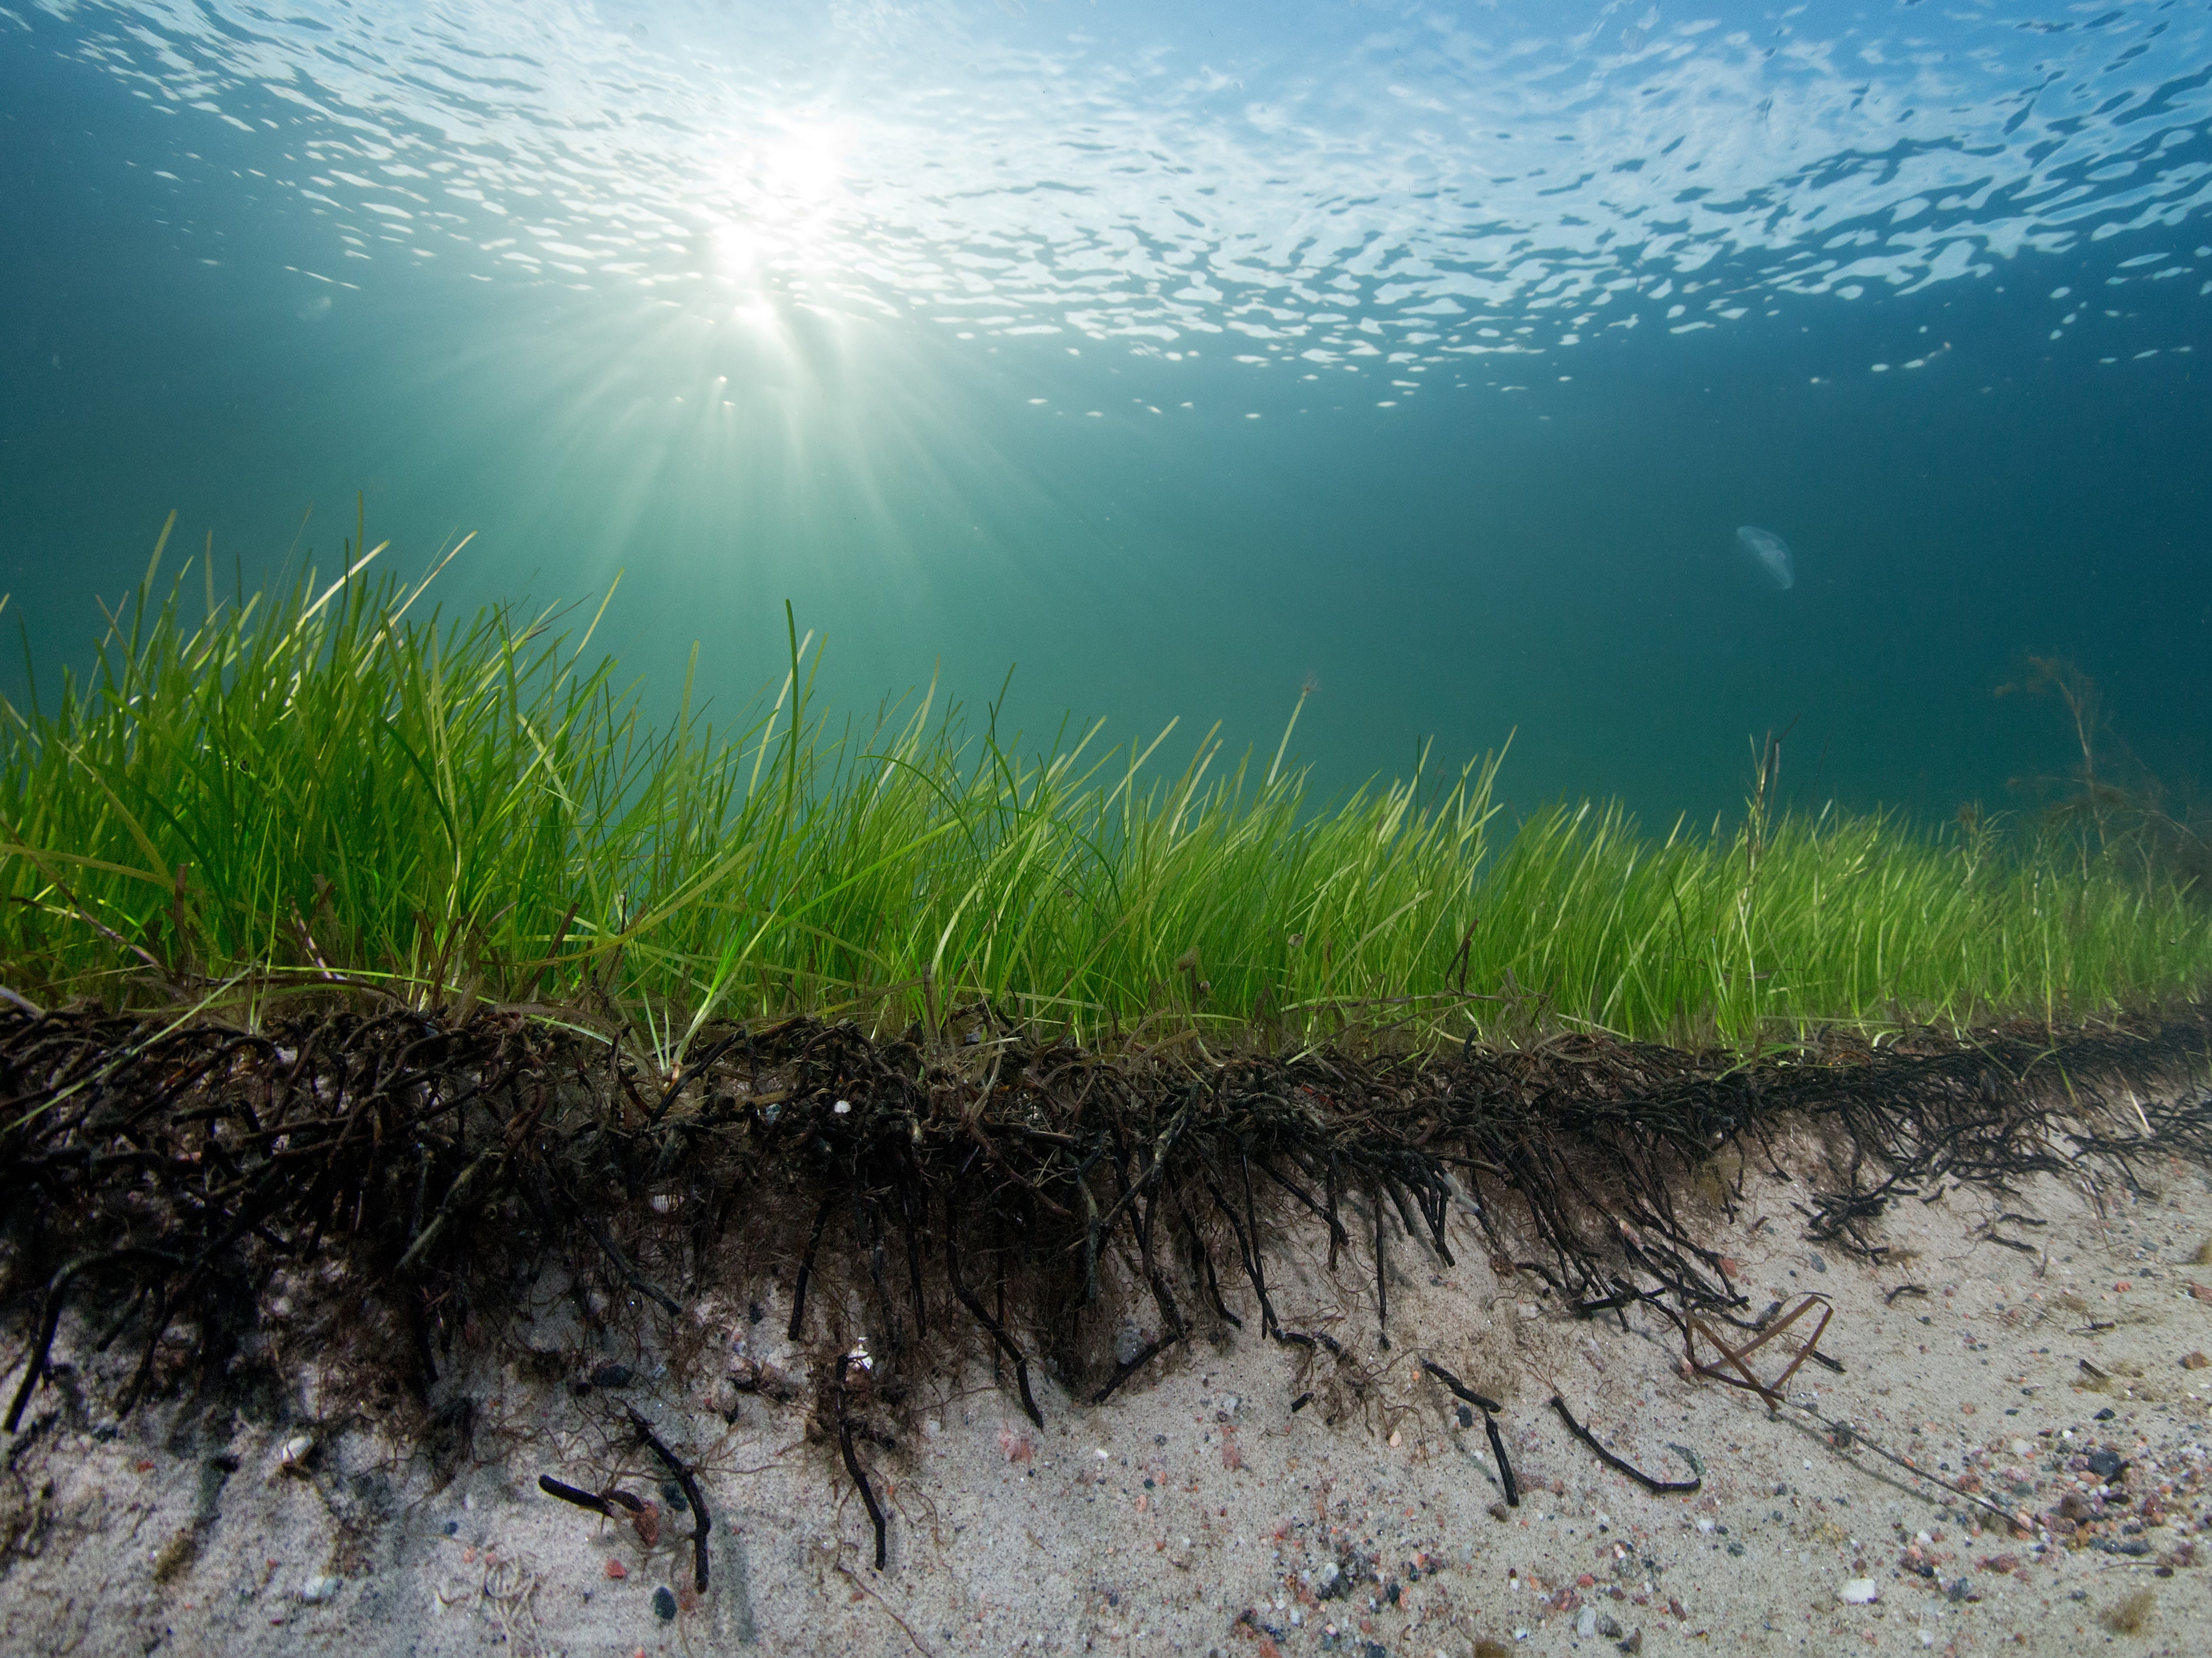 Seagrass' root mats can reduce coastal erosion up to 70%. Researchers at the University of Gothenburg used a wave tank to show how the roots bind the sand dunes